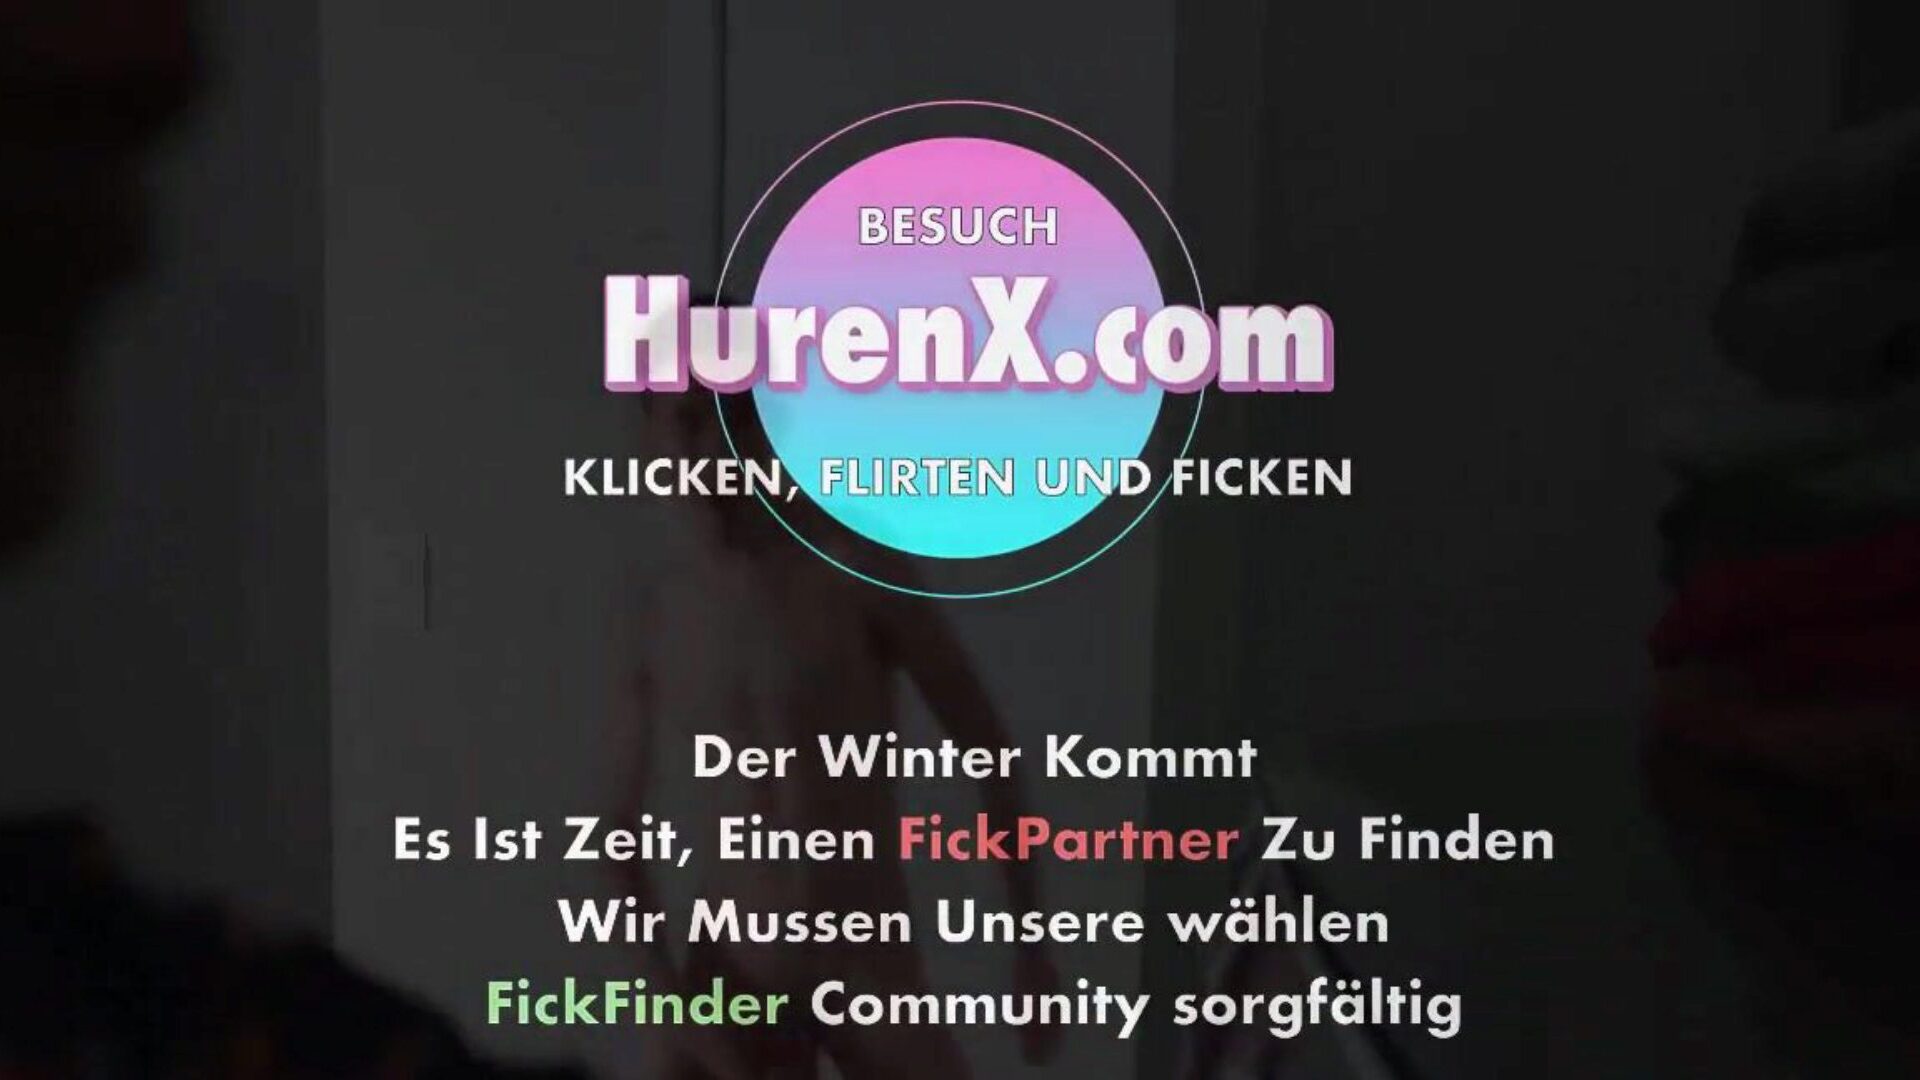 Stiefsohn Fickt Stiefmutter, Free Mutter German HD Porn c3 Watch Stiefsohn Fickt Stiefmutter episode on xHamster, the thickest HD hump tube web page with tons of free-for-all German Mutter German & Ujizz porno movies